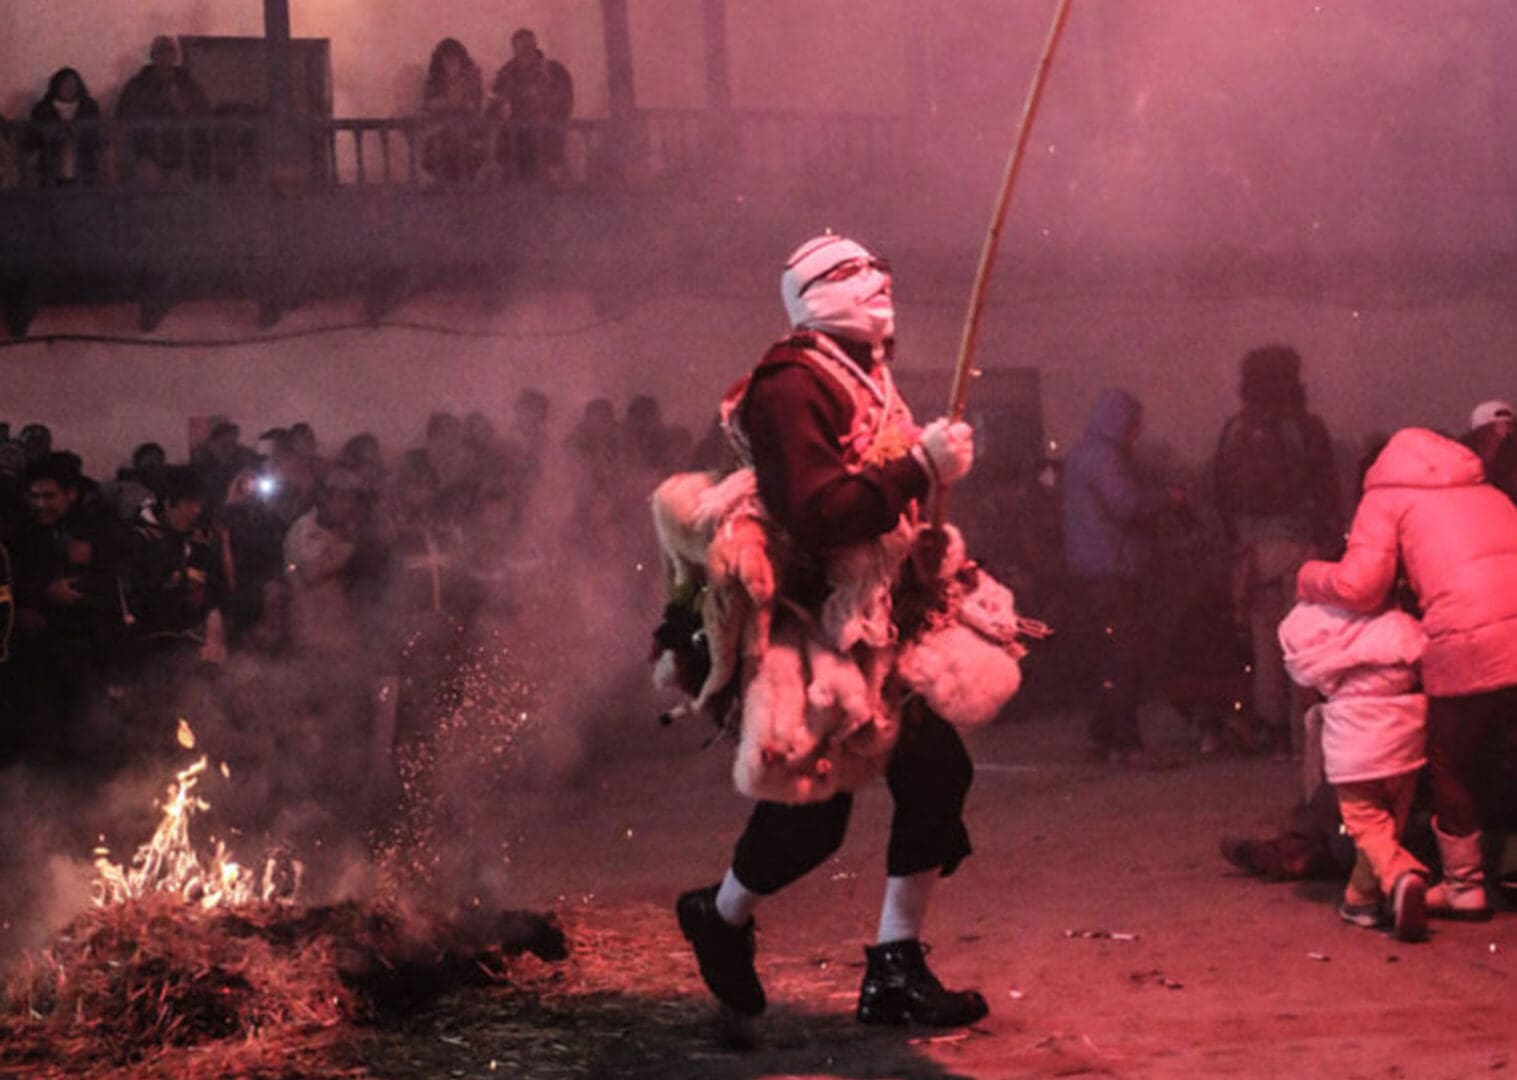 A man in costume walking through the fire.